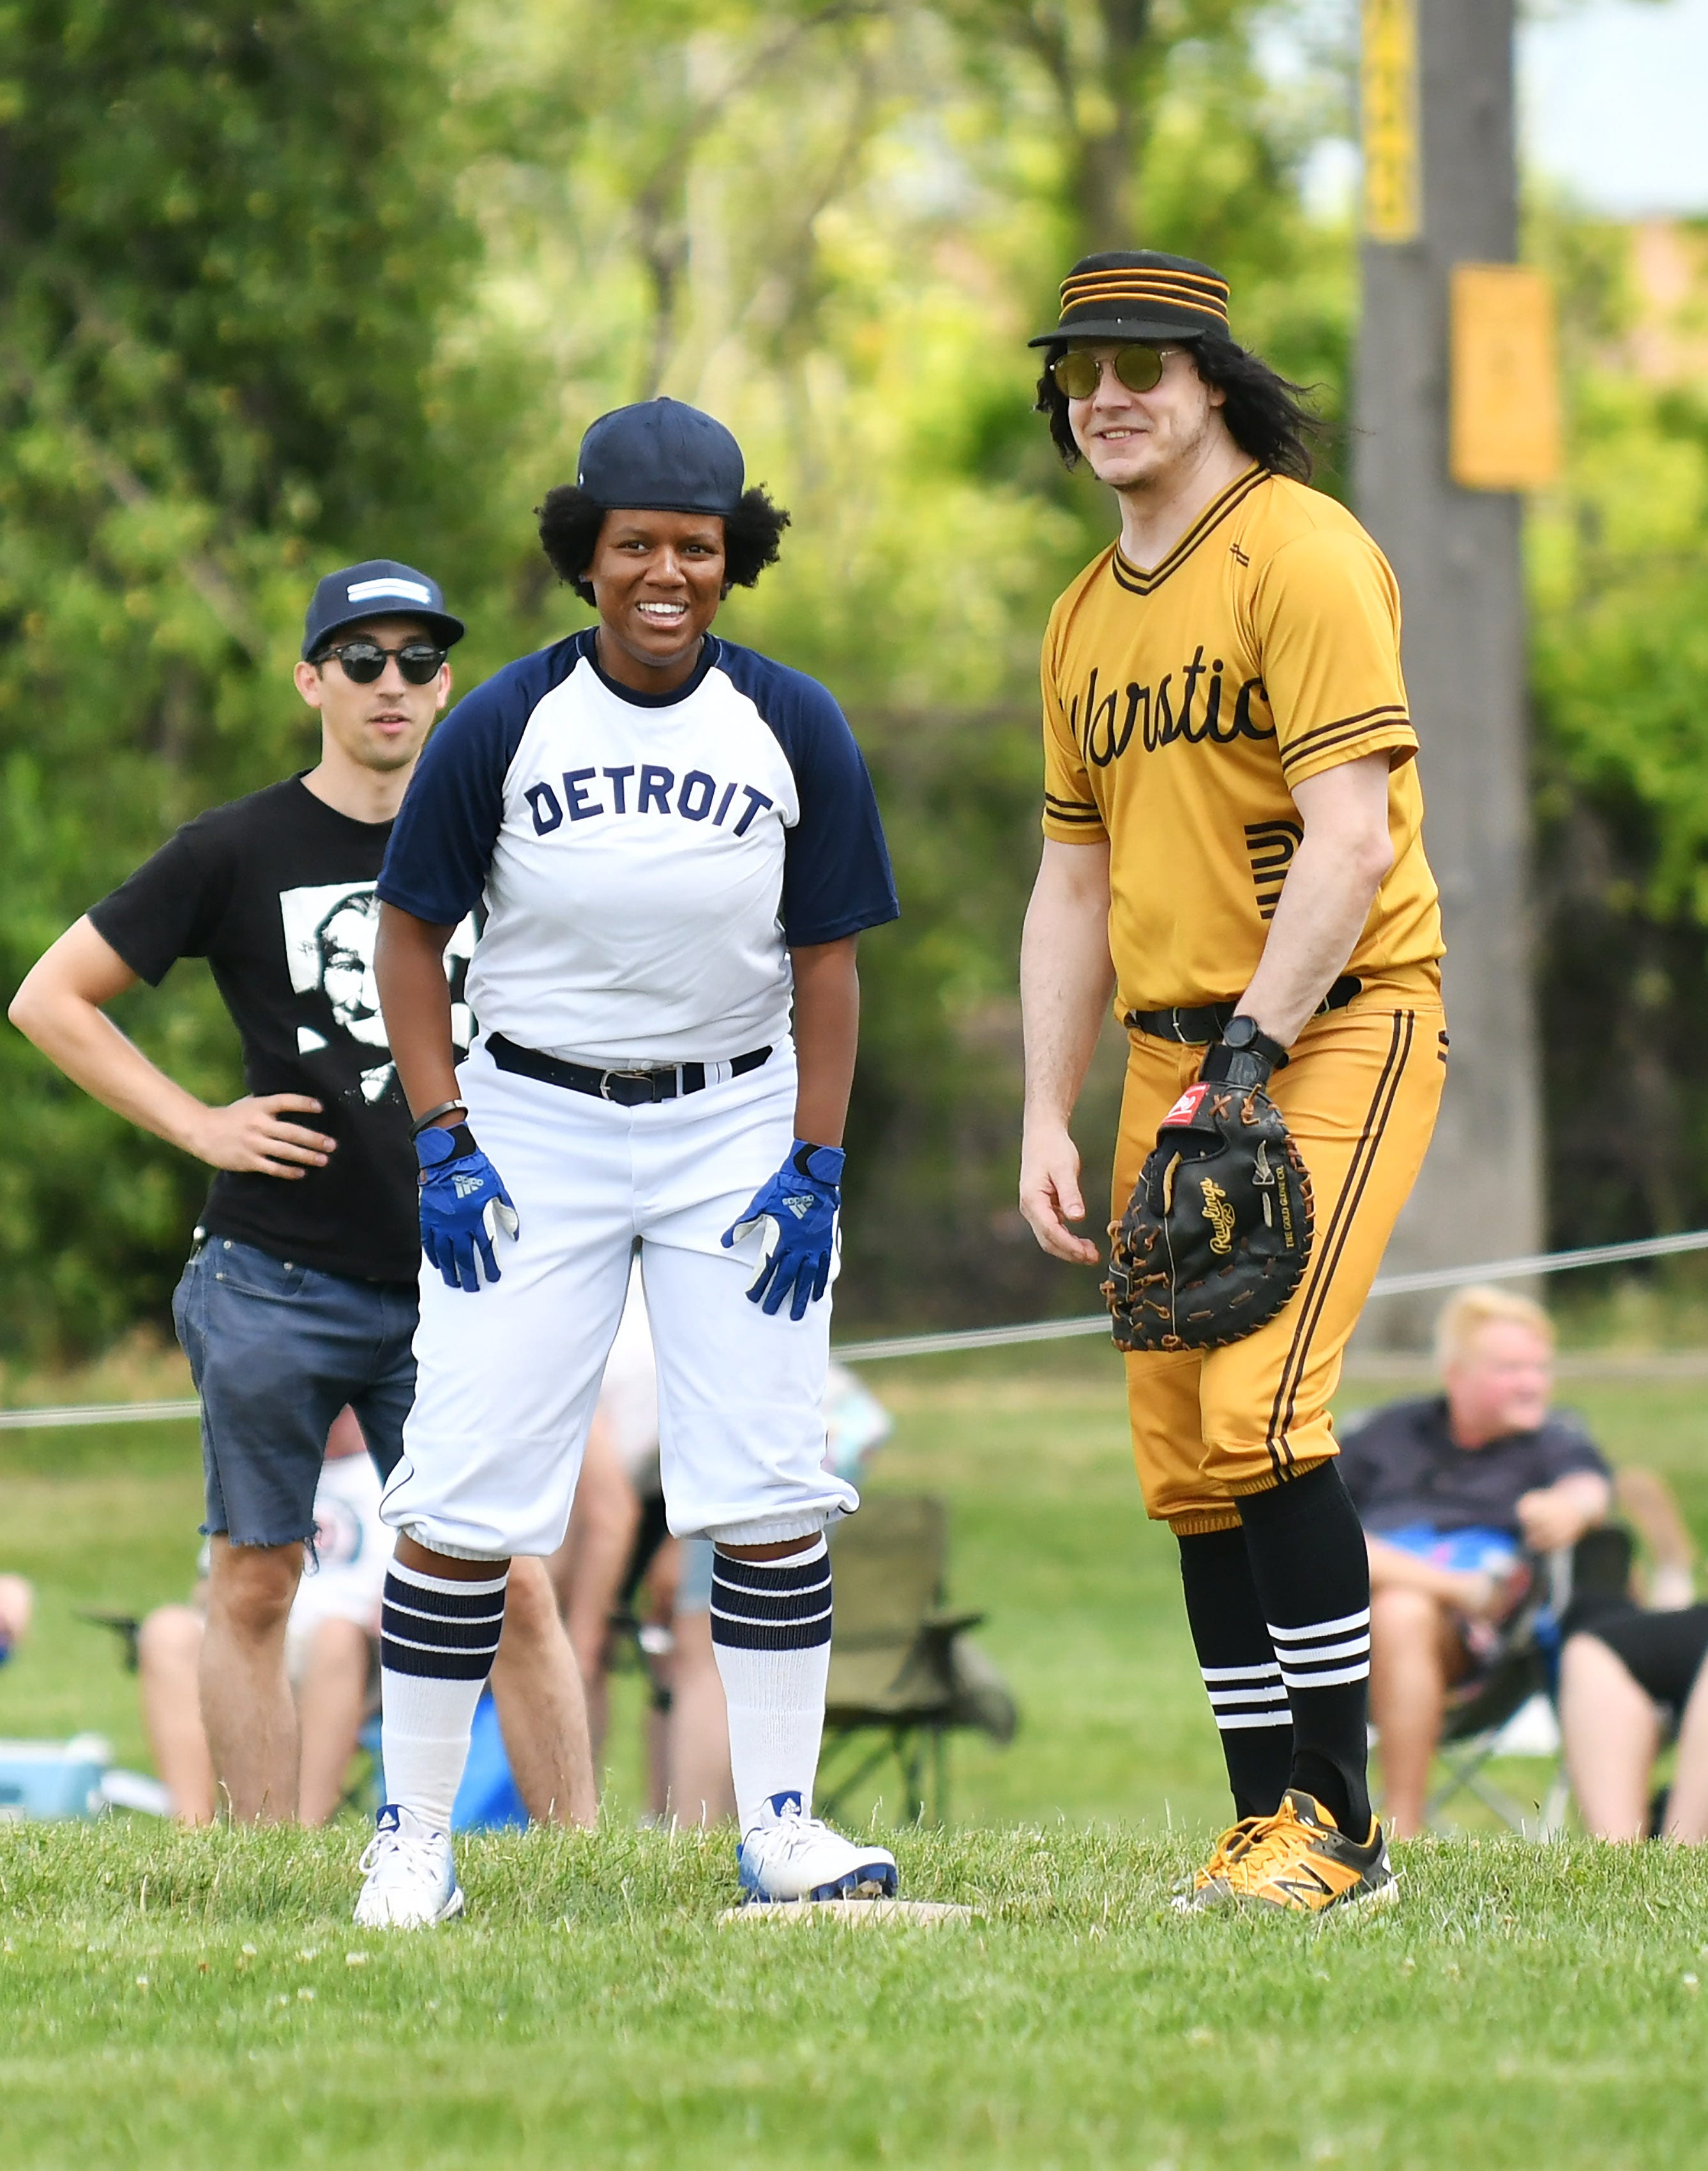 Jack White, right, chats with Vanessa Rose, 36, of Royal Oak, granddaughter of Norman "Turkey" Stearnes, after she reaches first base. Stearnes, a Hall of Famer, played 11 seasons for the Detroit Stars Negro League team.